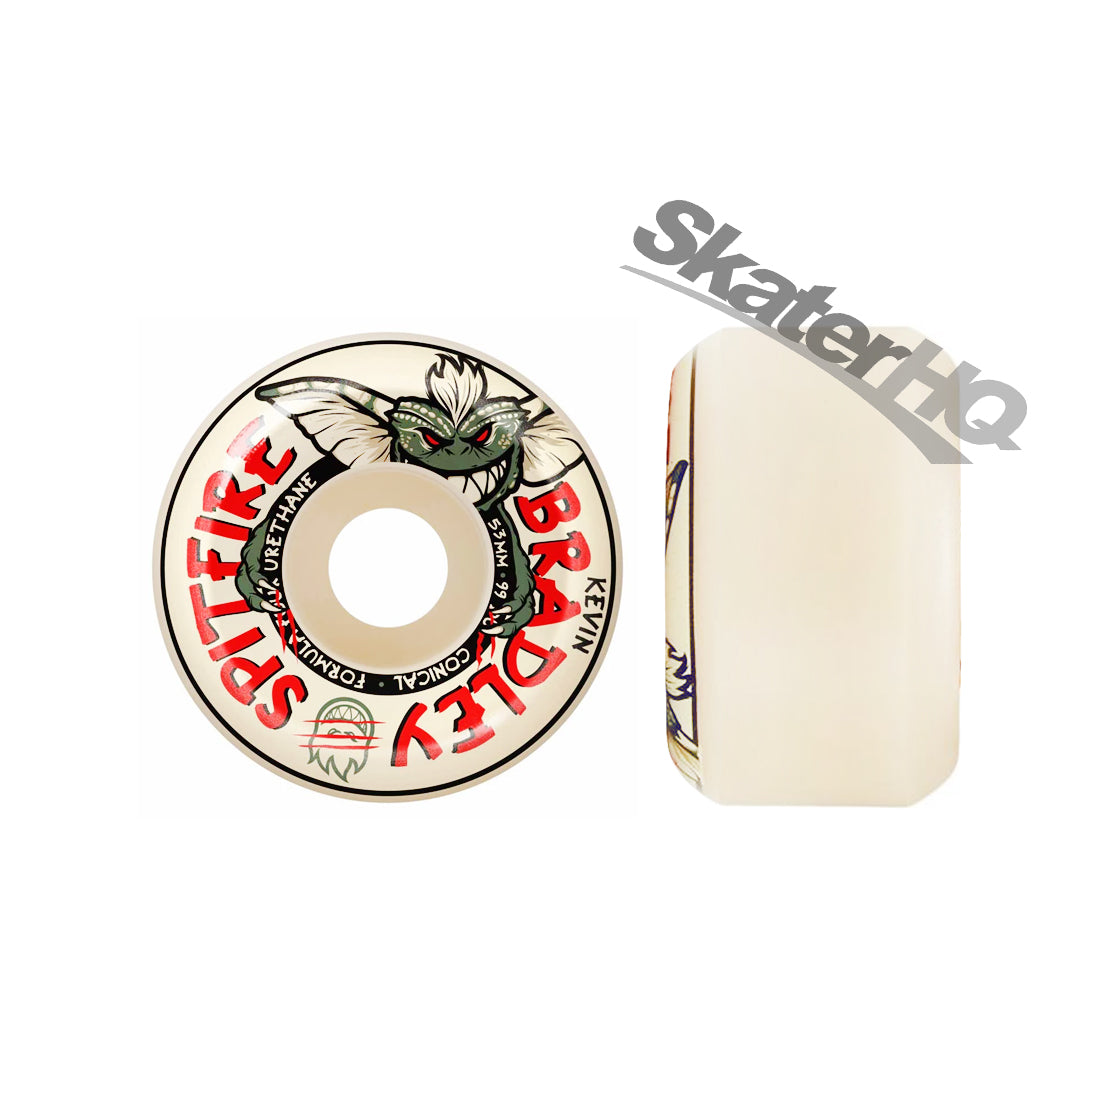 Spitfire Form Four 52mm 99a Bradley Conical - After Midnight Skateboard Wheels